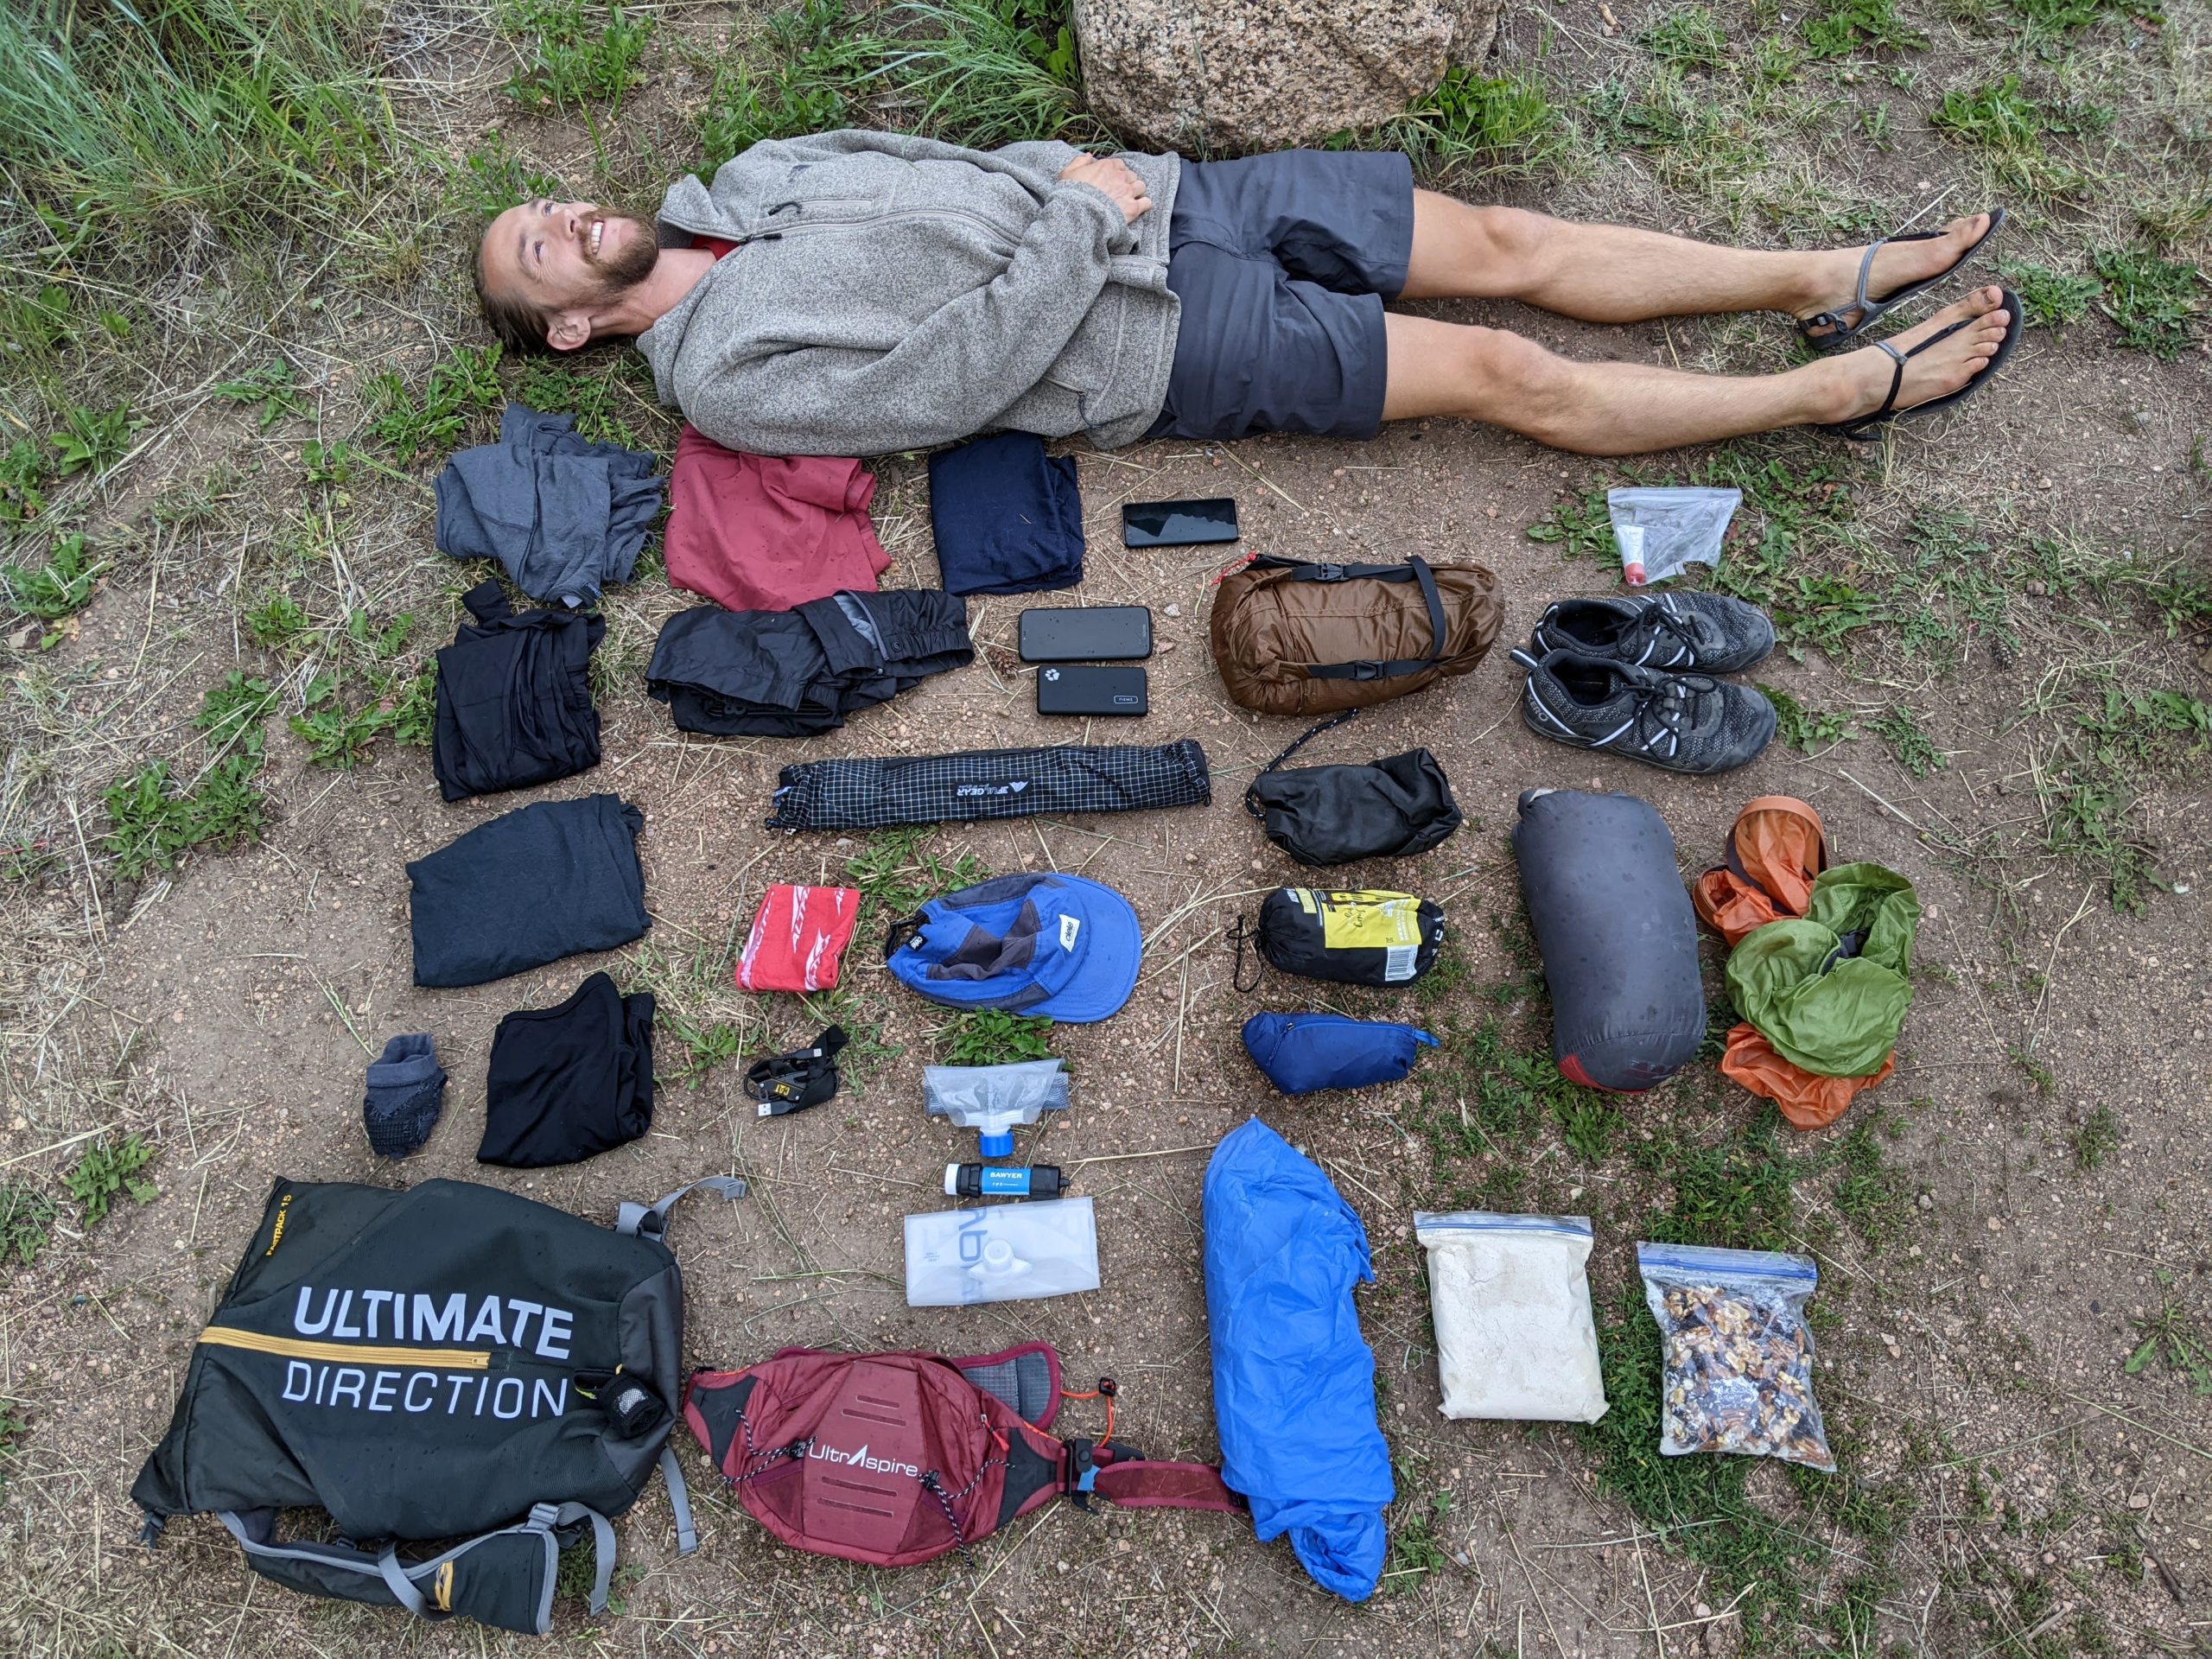 The Most Minimal Colorado Trail Gear List - Under 12lbs and 25 Litres!